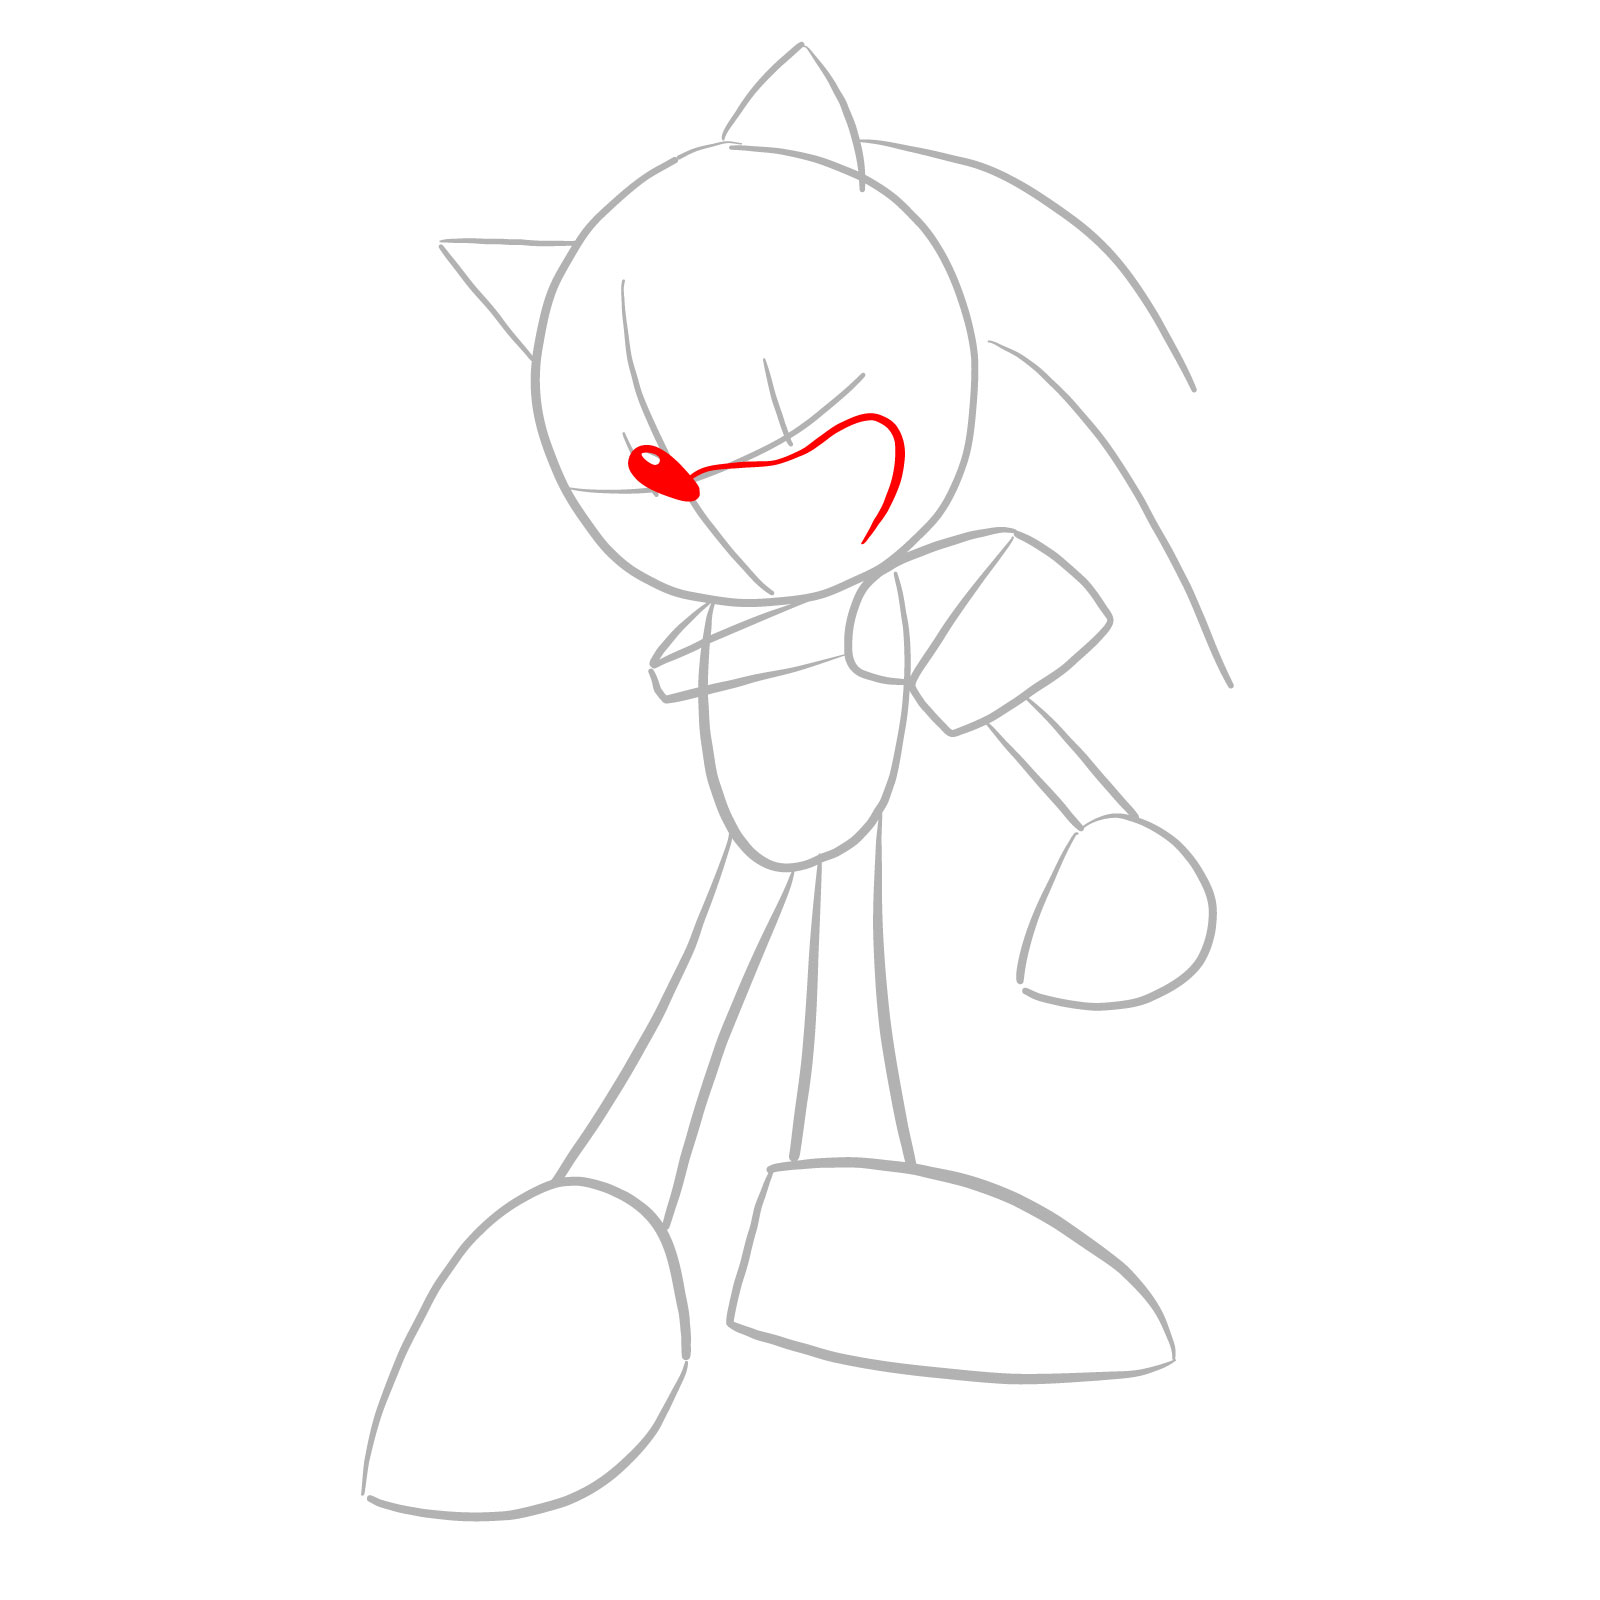 How to draw Coldsteel the Hedgehog - step 04